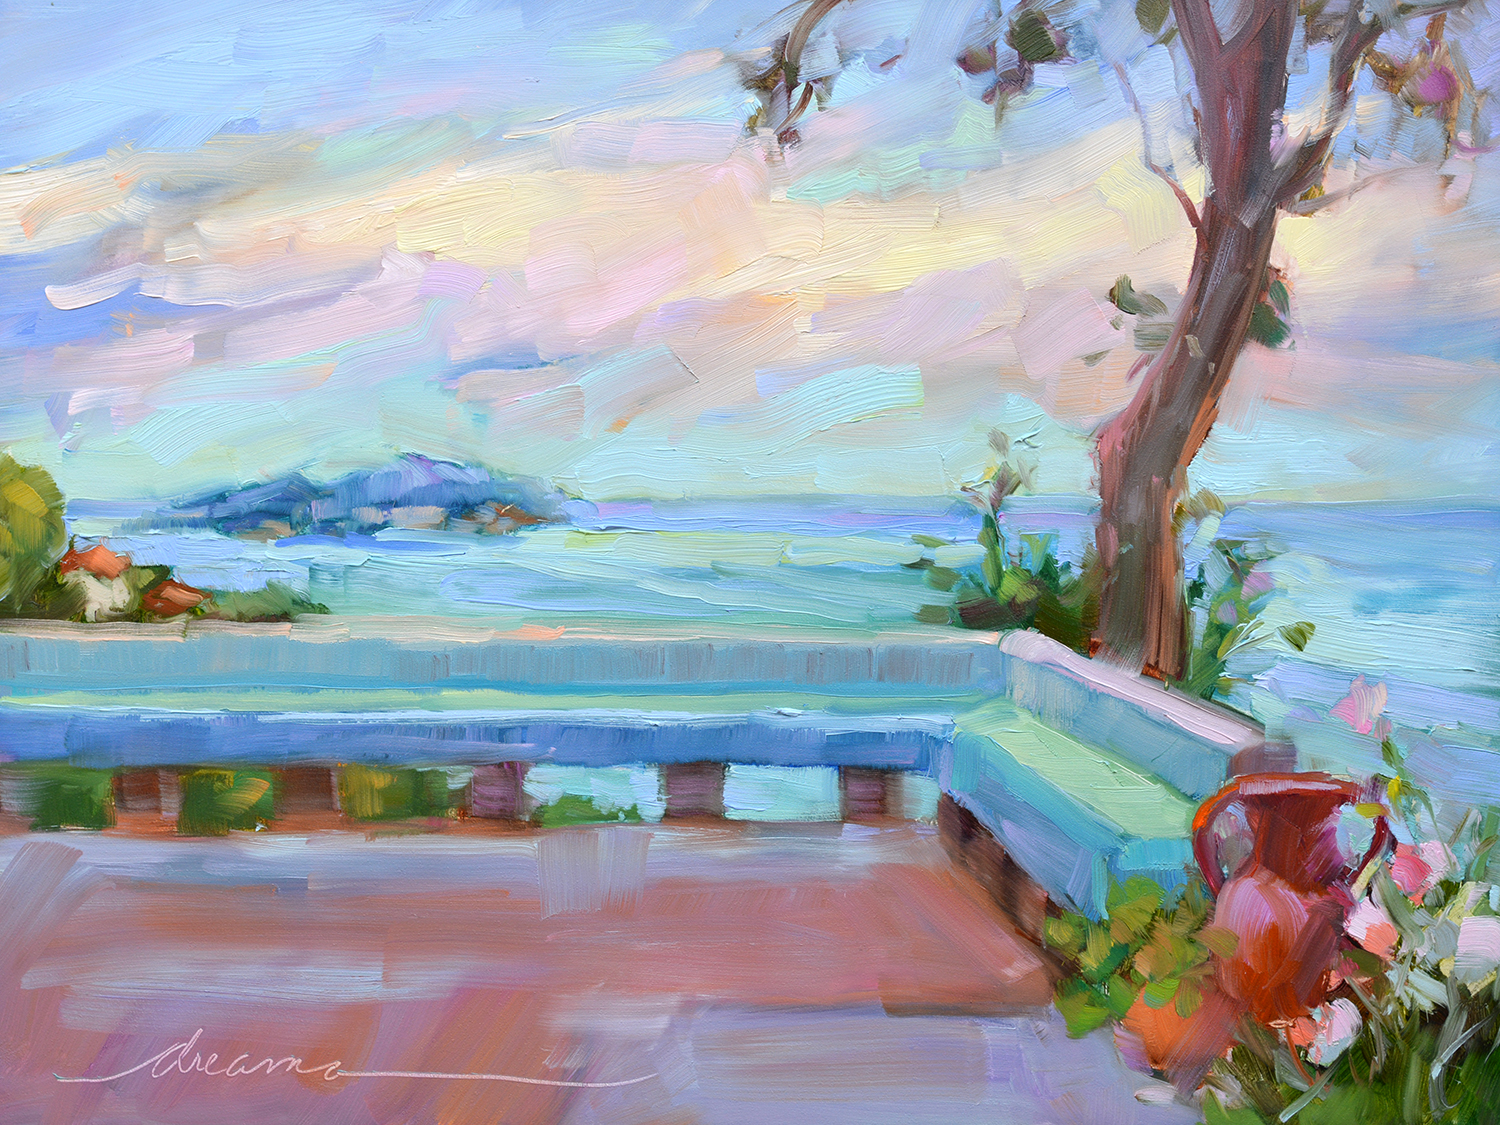 Mediterranean Tranquility - Dreama Perry - https://dreamatolleperry.com/